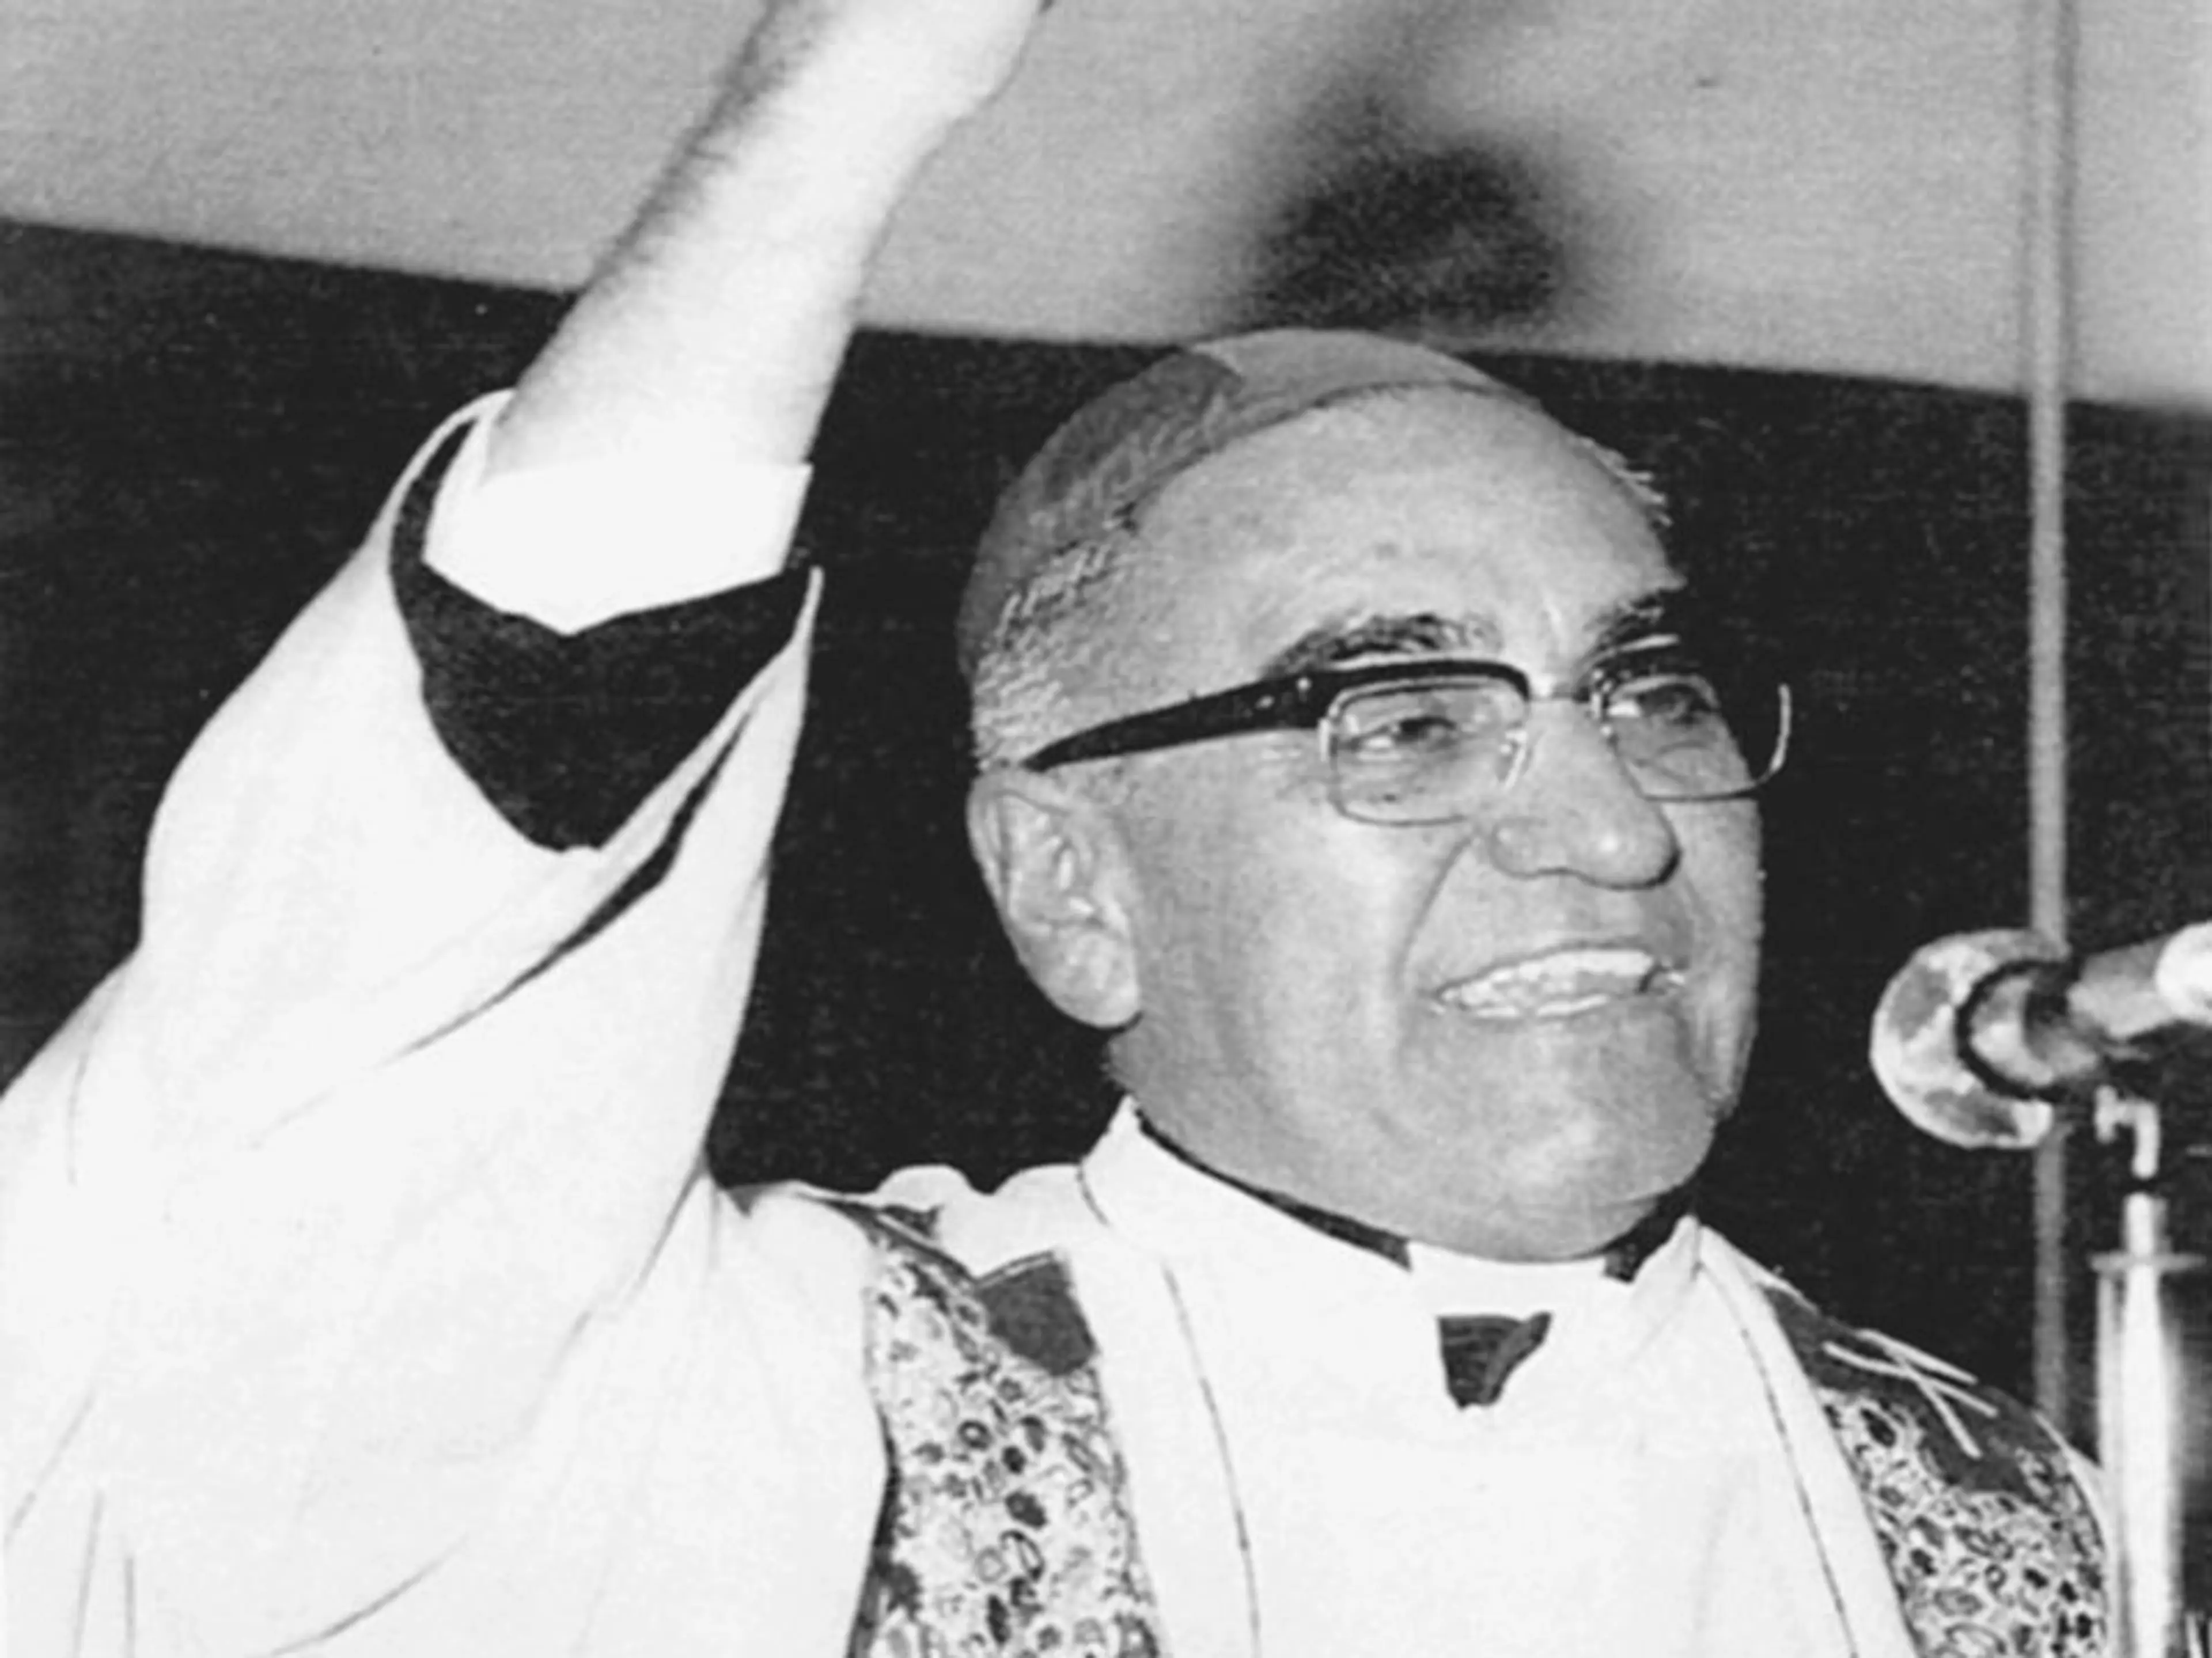 Romero’s Beatification paved the way for him to be recognised in the canon of Catholic saints